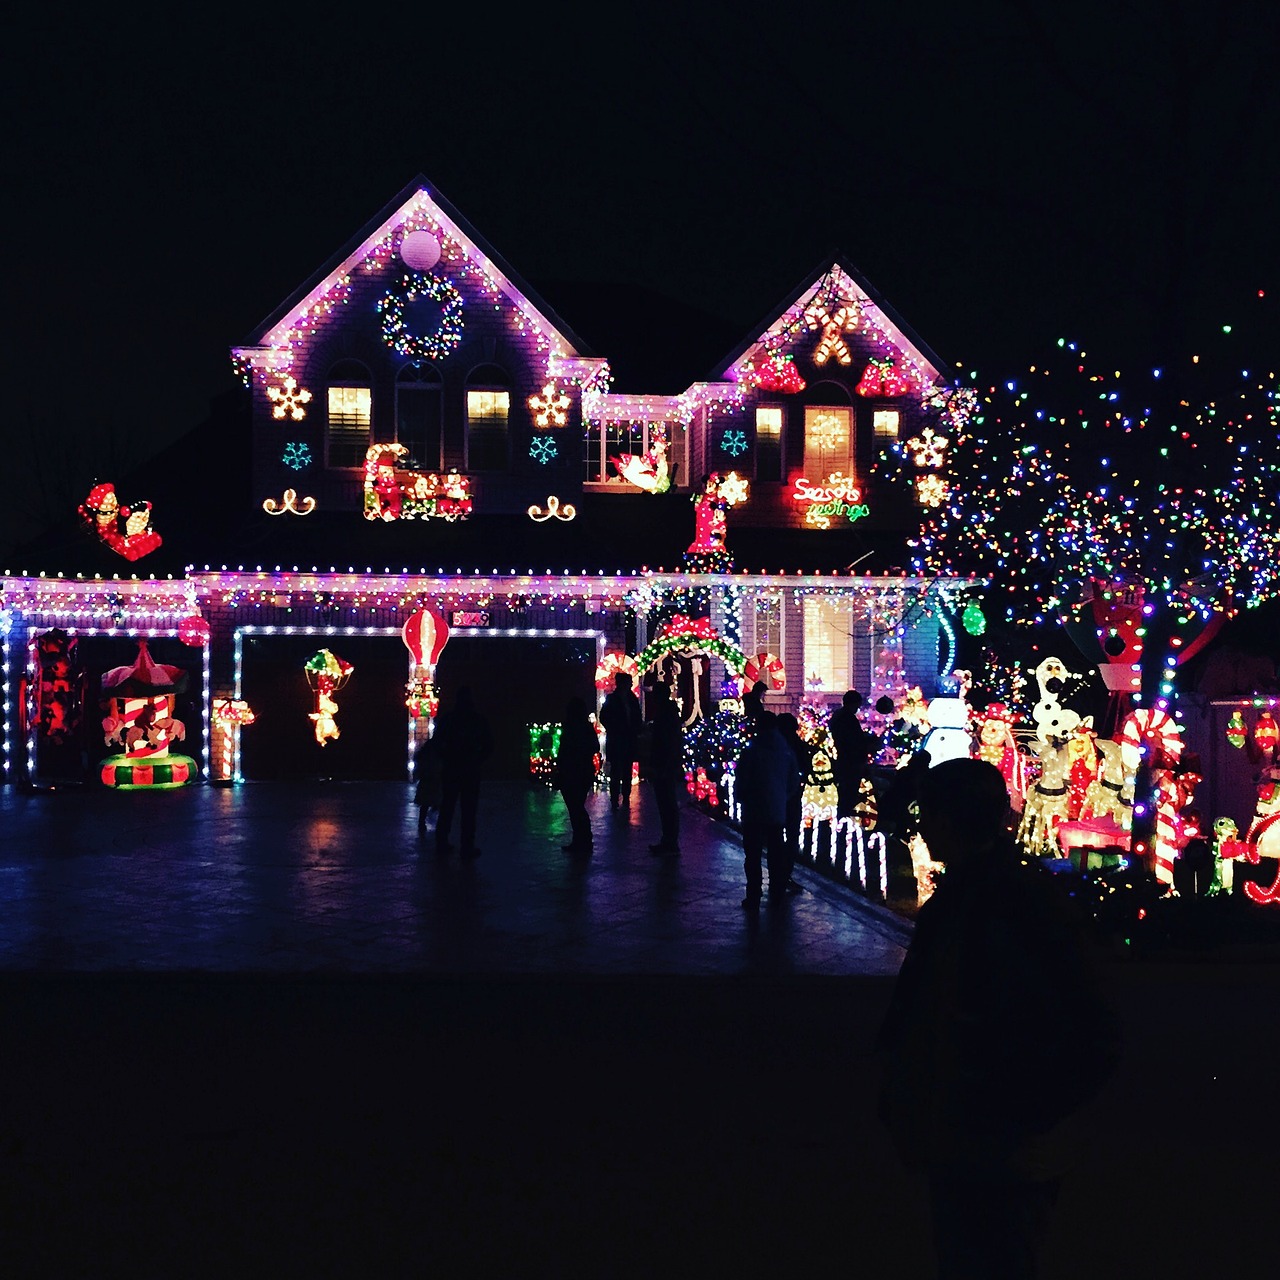 It would take 2,638 Christmas lights for your house to be seen from space